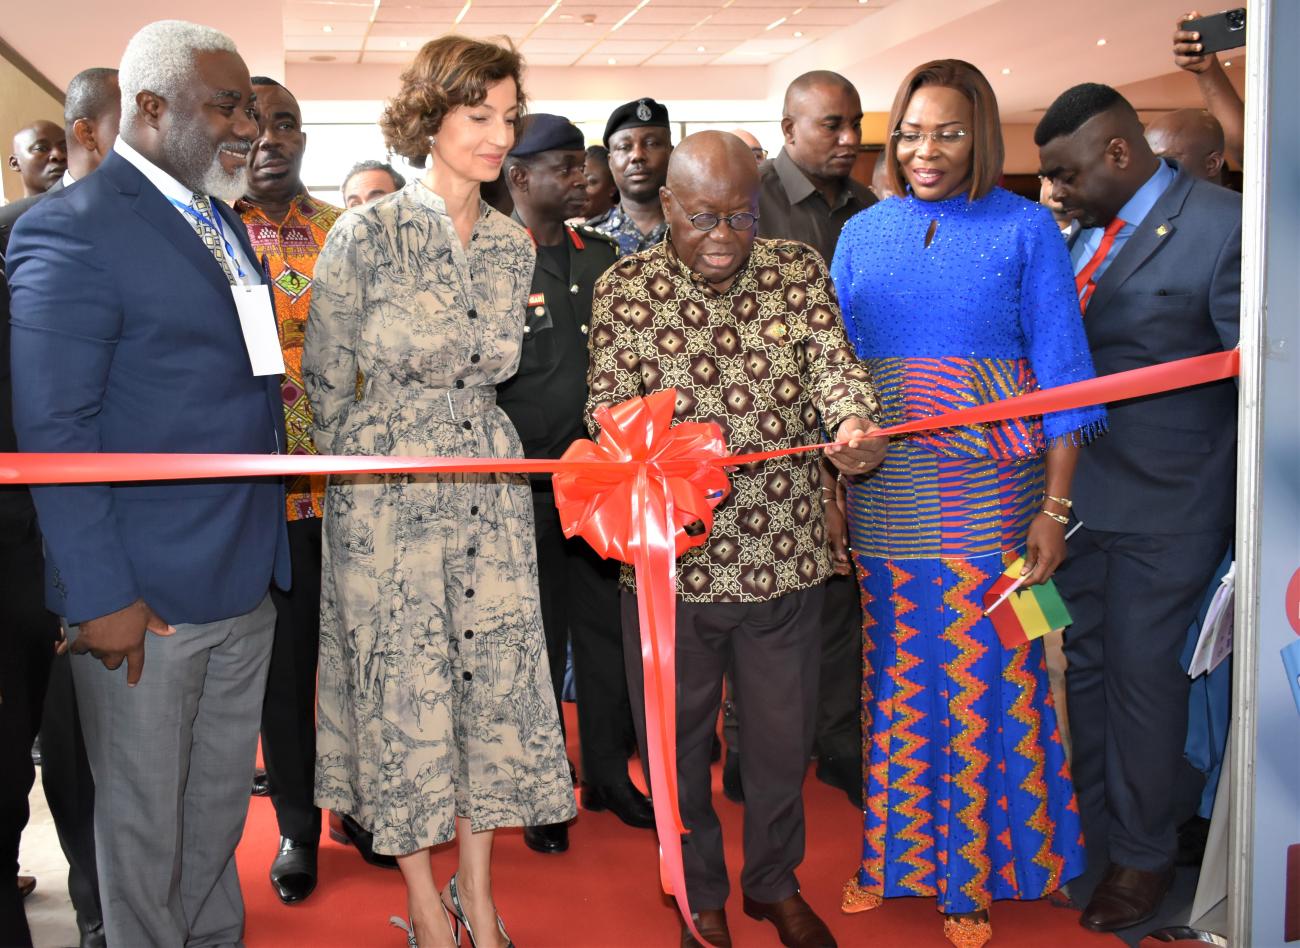 President Akuffo-Addo(2nd from right) with Ms Audrey Azoulay, Director General UNESCO (2nd from left) and Elizabeth Sackey, MCE of Accra (right)